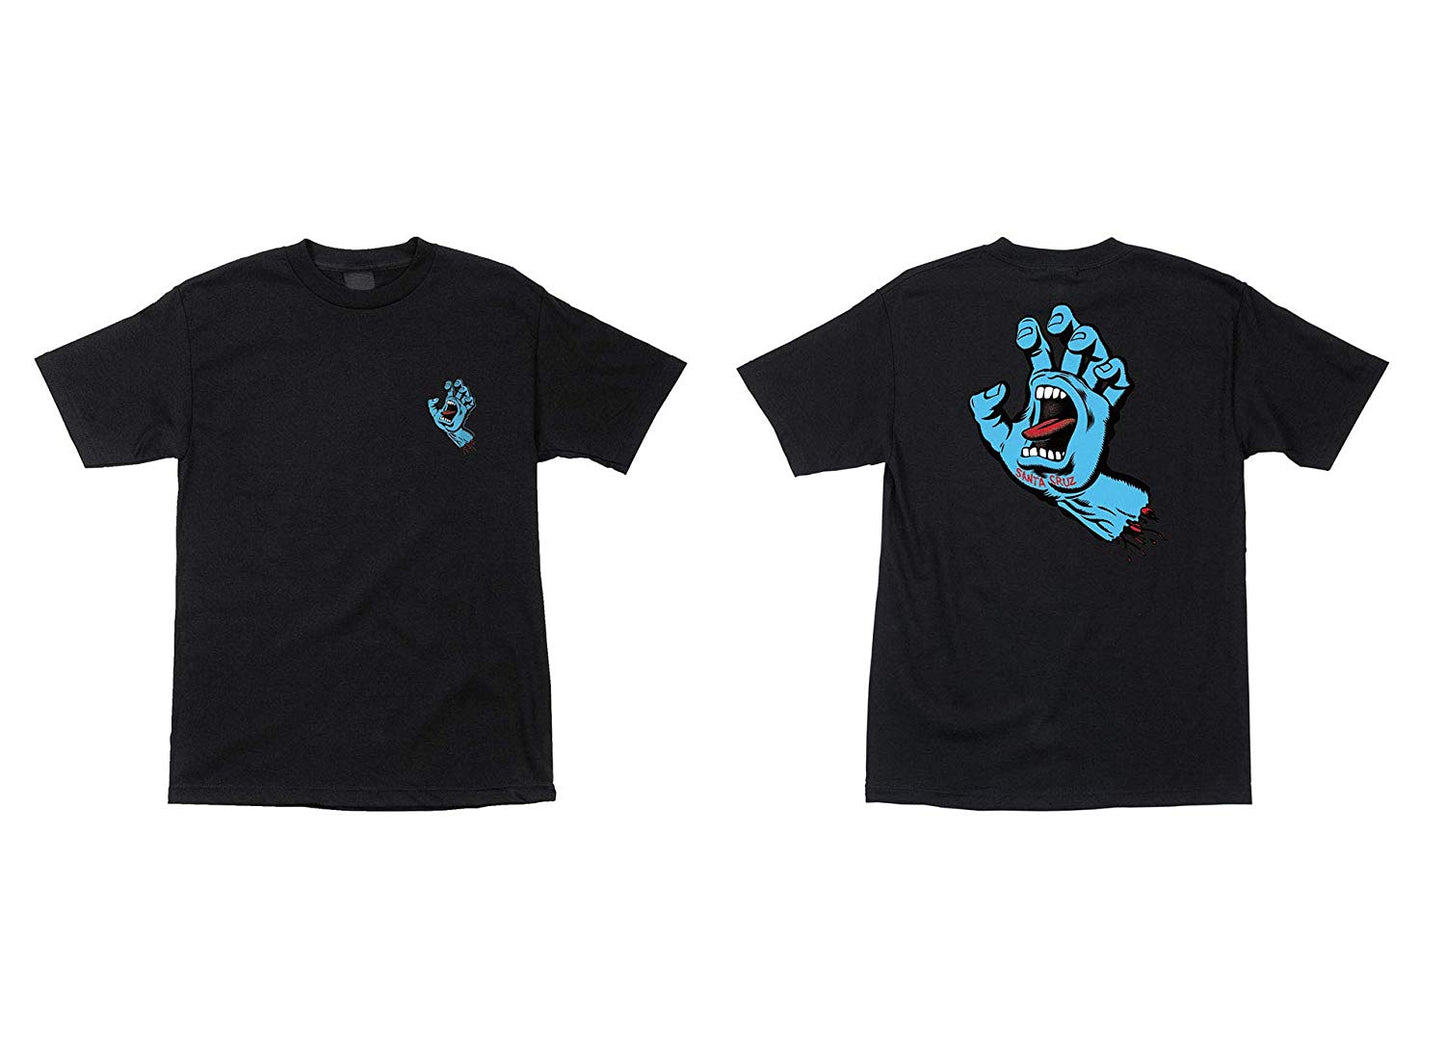 Screaming Hand S/S Tee Shirt Blk (size options listed)